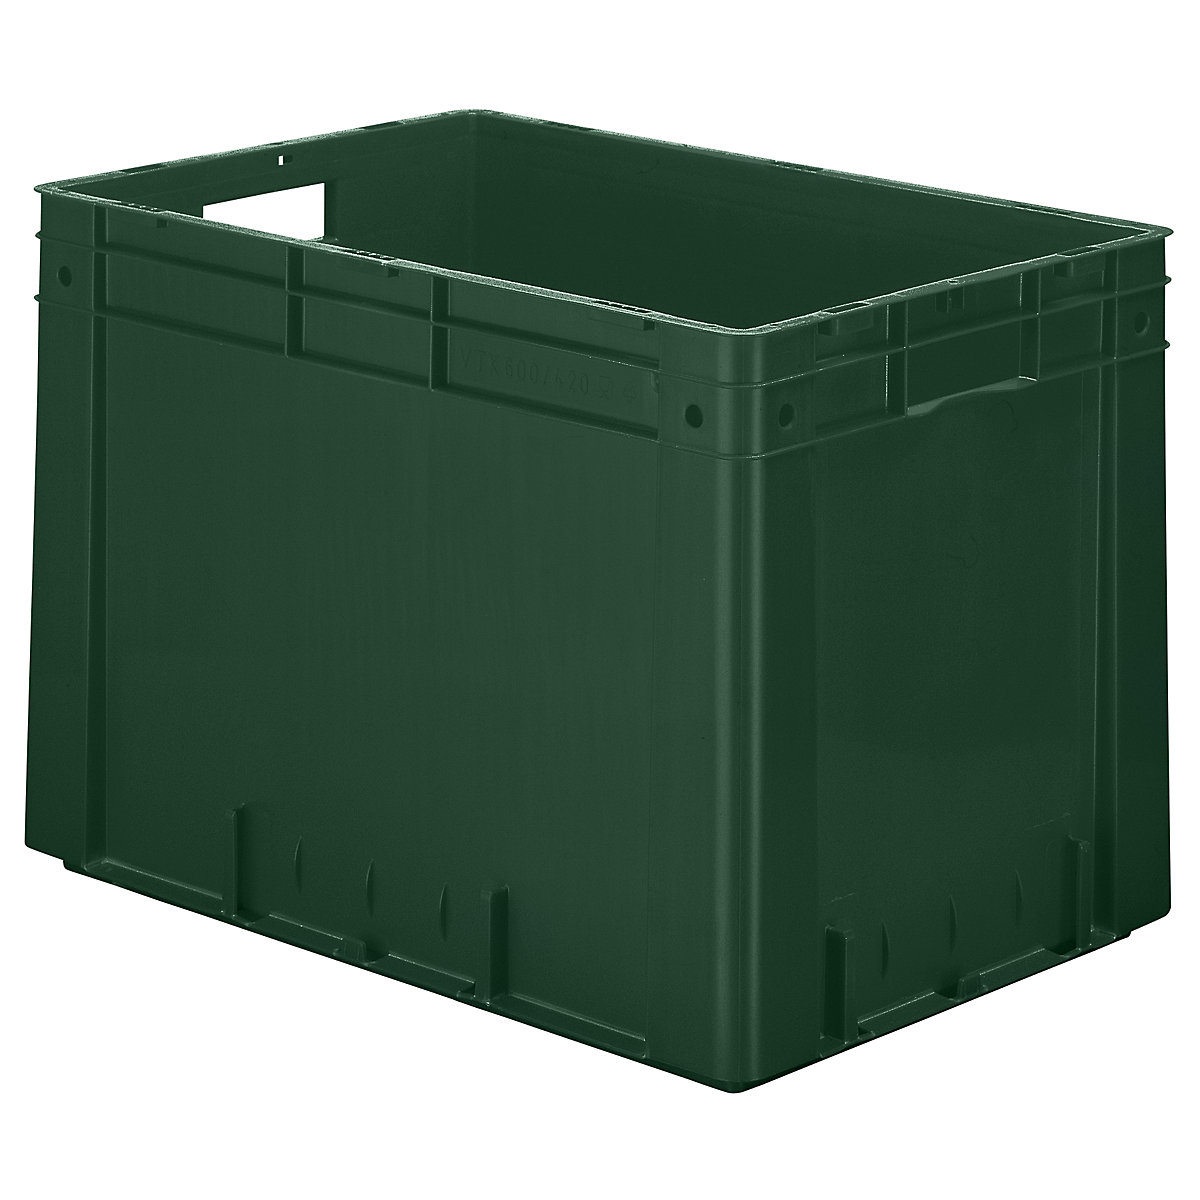 Heavy duty Euro container, polypropylene, capacity 80 l, LxWxH 600 x 400 x 420 mm, solid walls, solid base, green, pack of 2